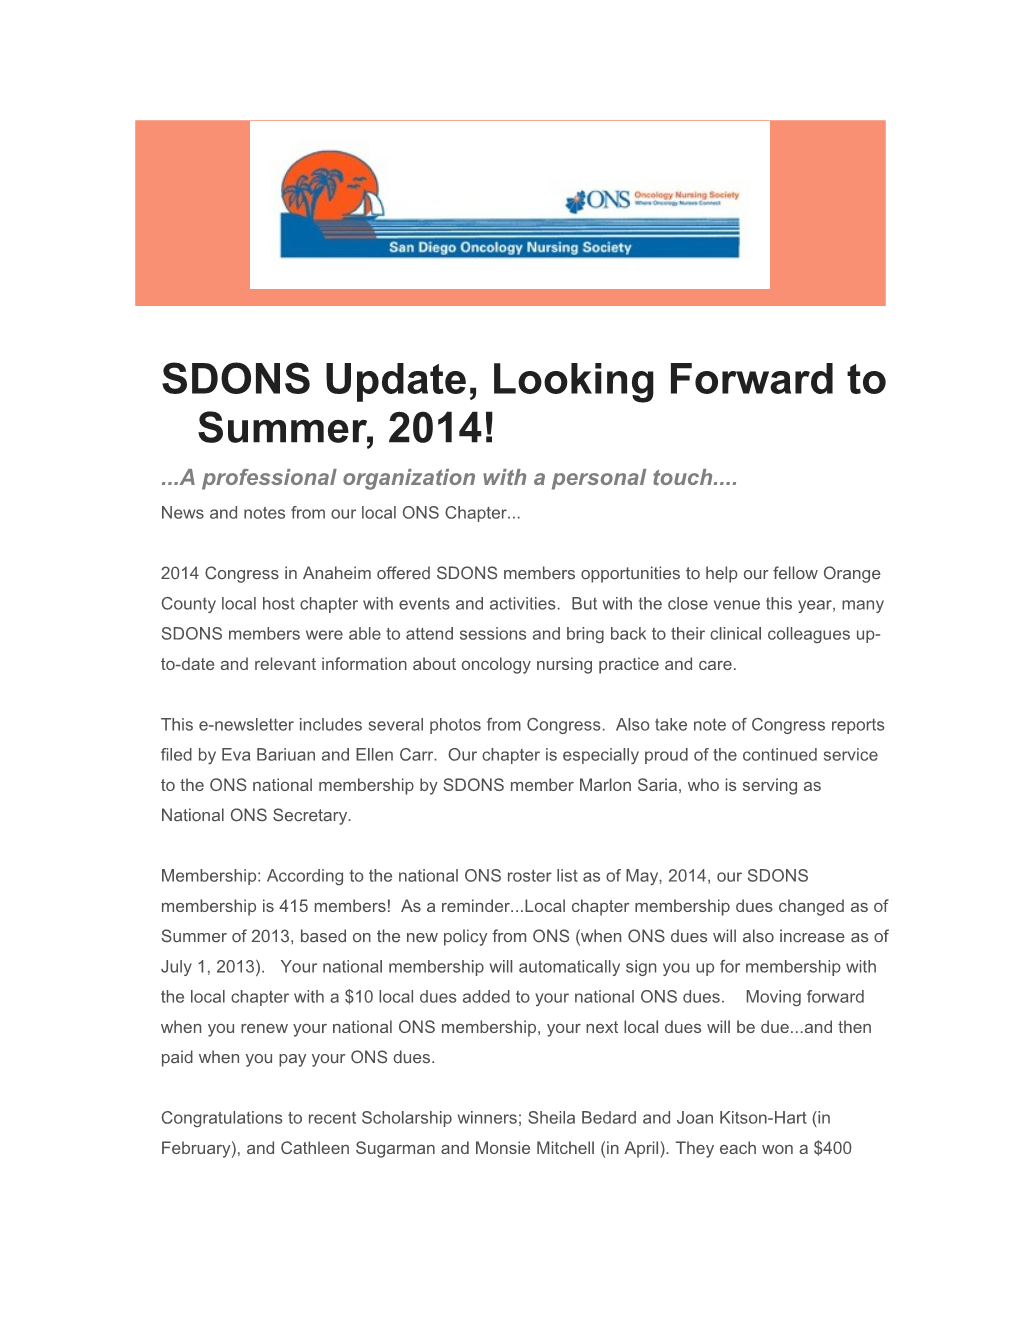 SDONS Update, Looking Forward to Summer, 2014!